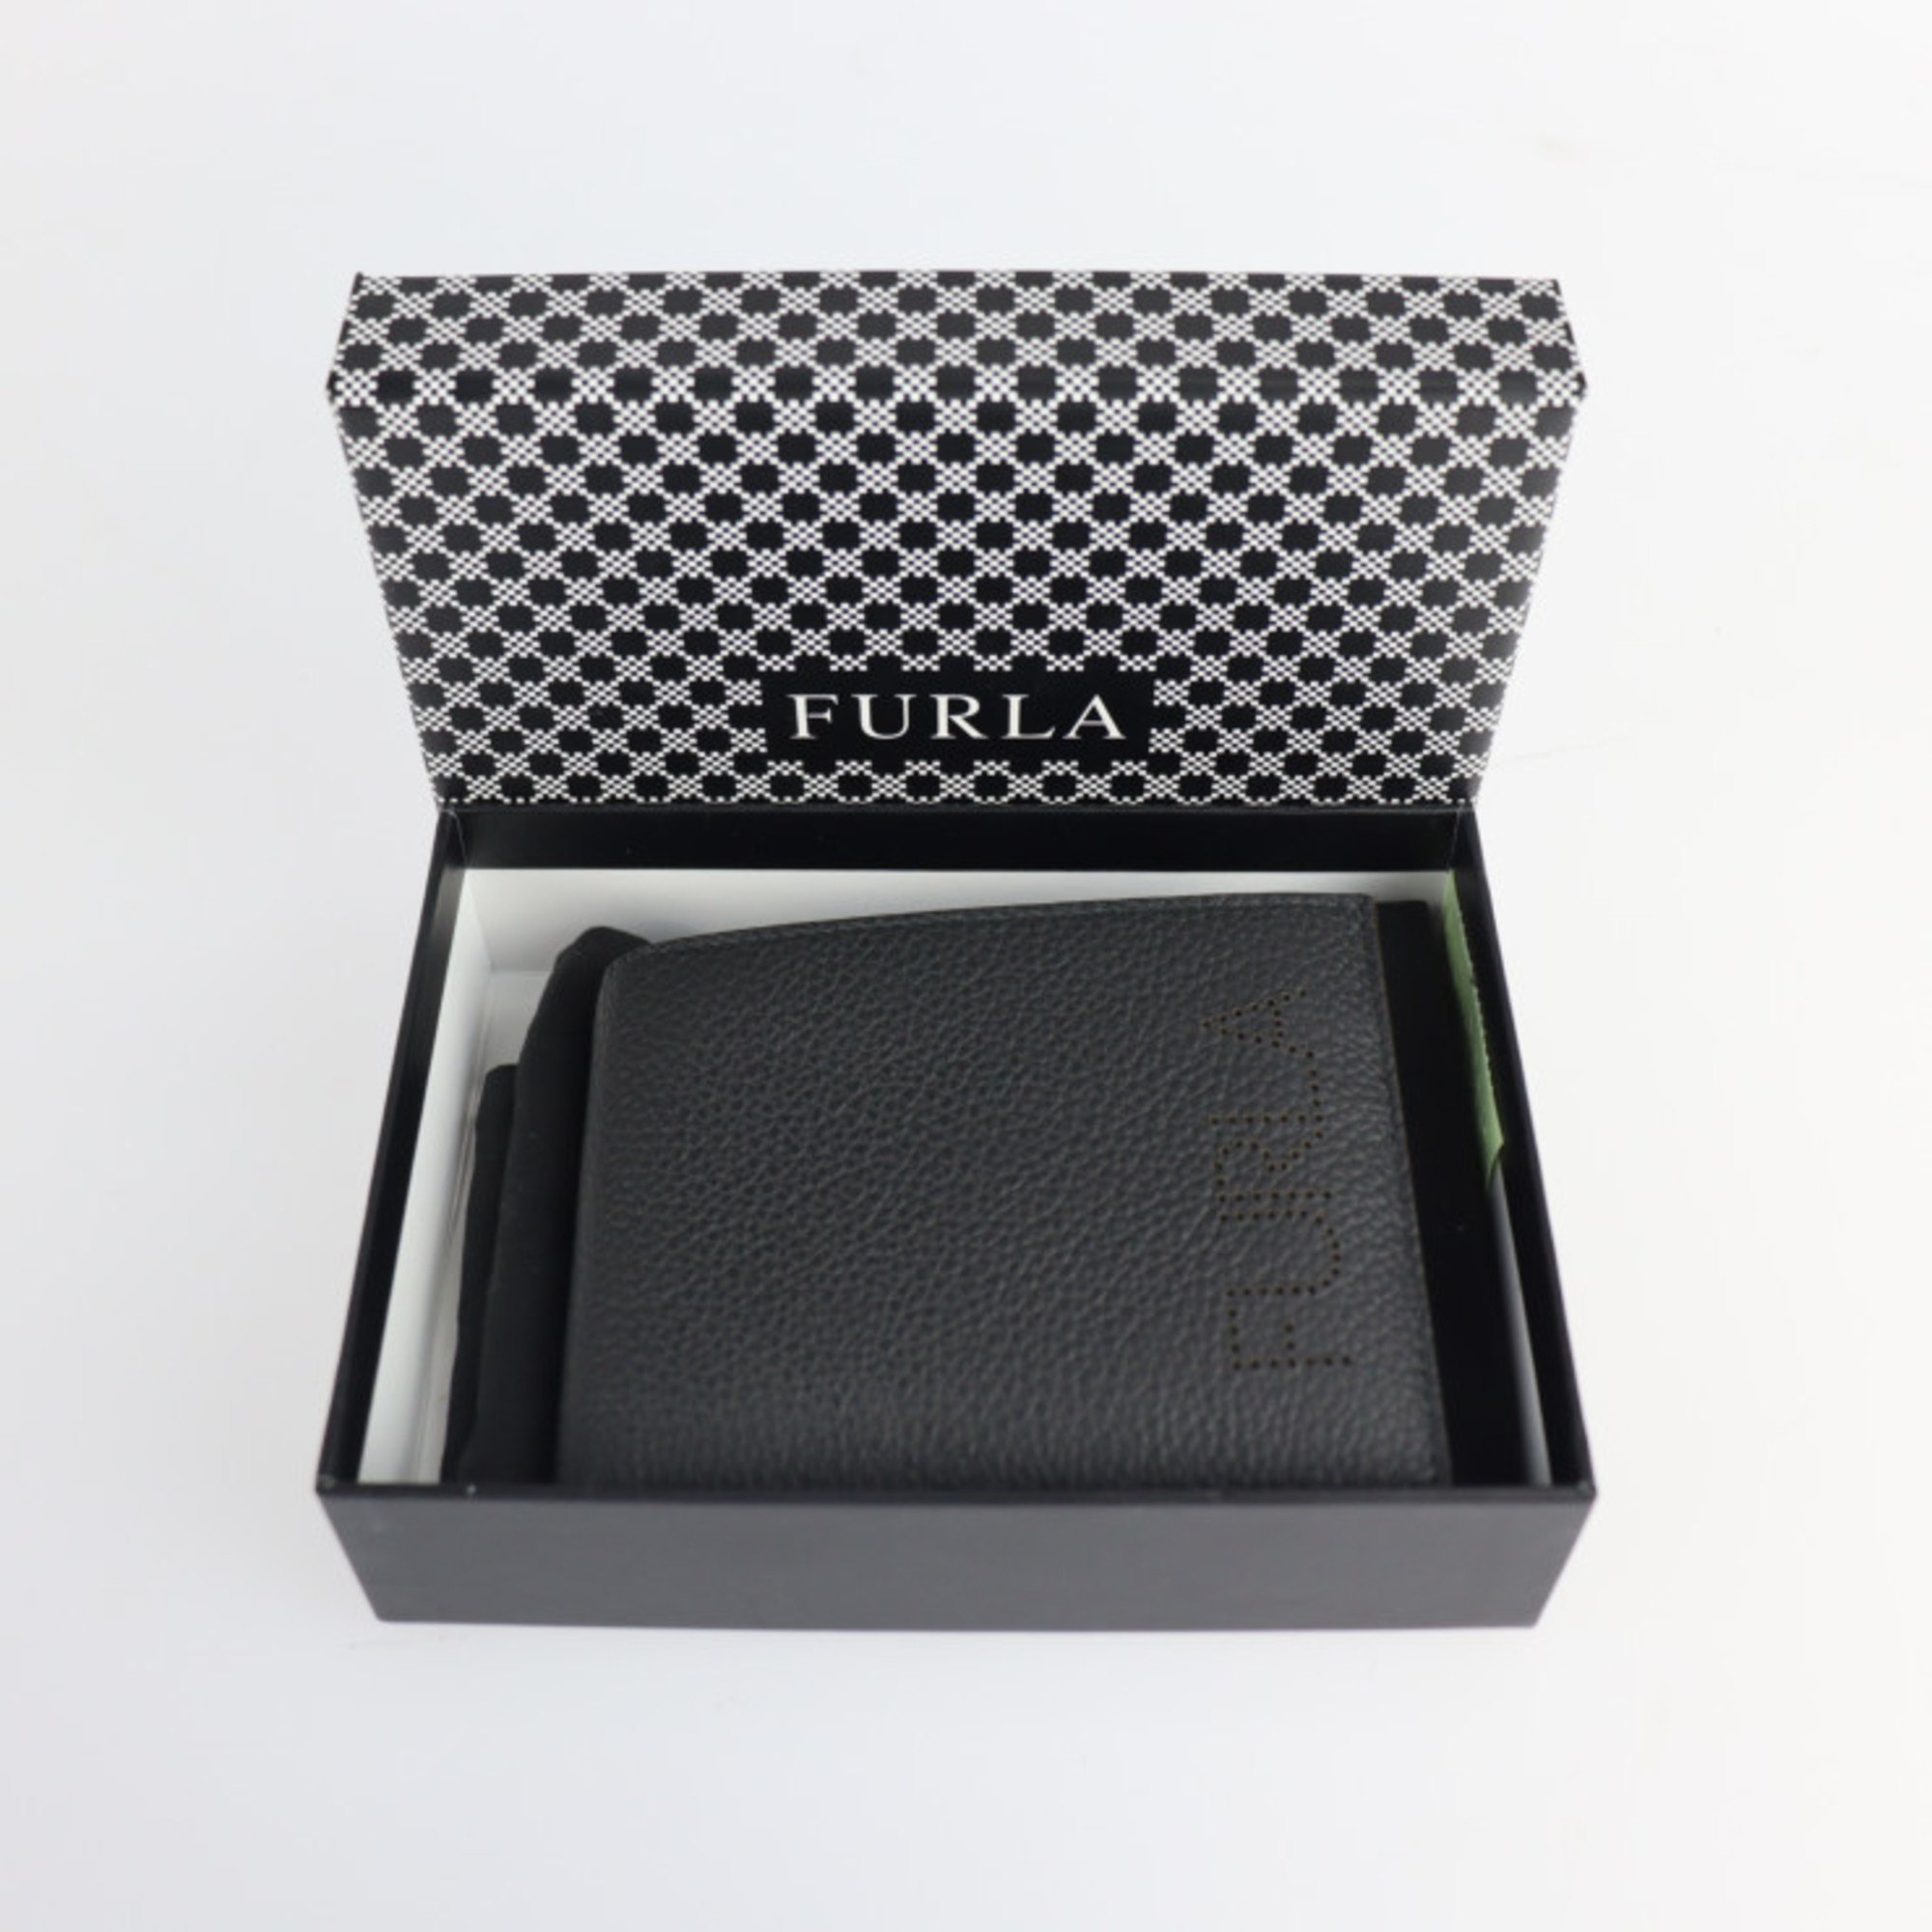 Furla Ulysse M bifold wallet in leather onyx black with pass case